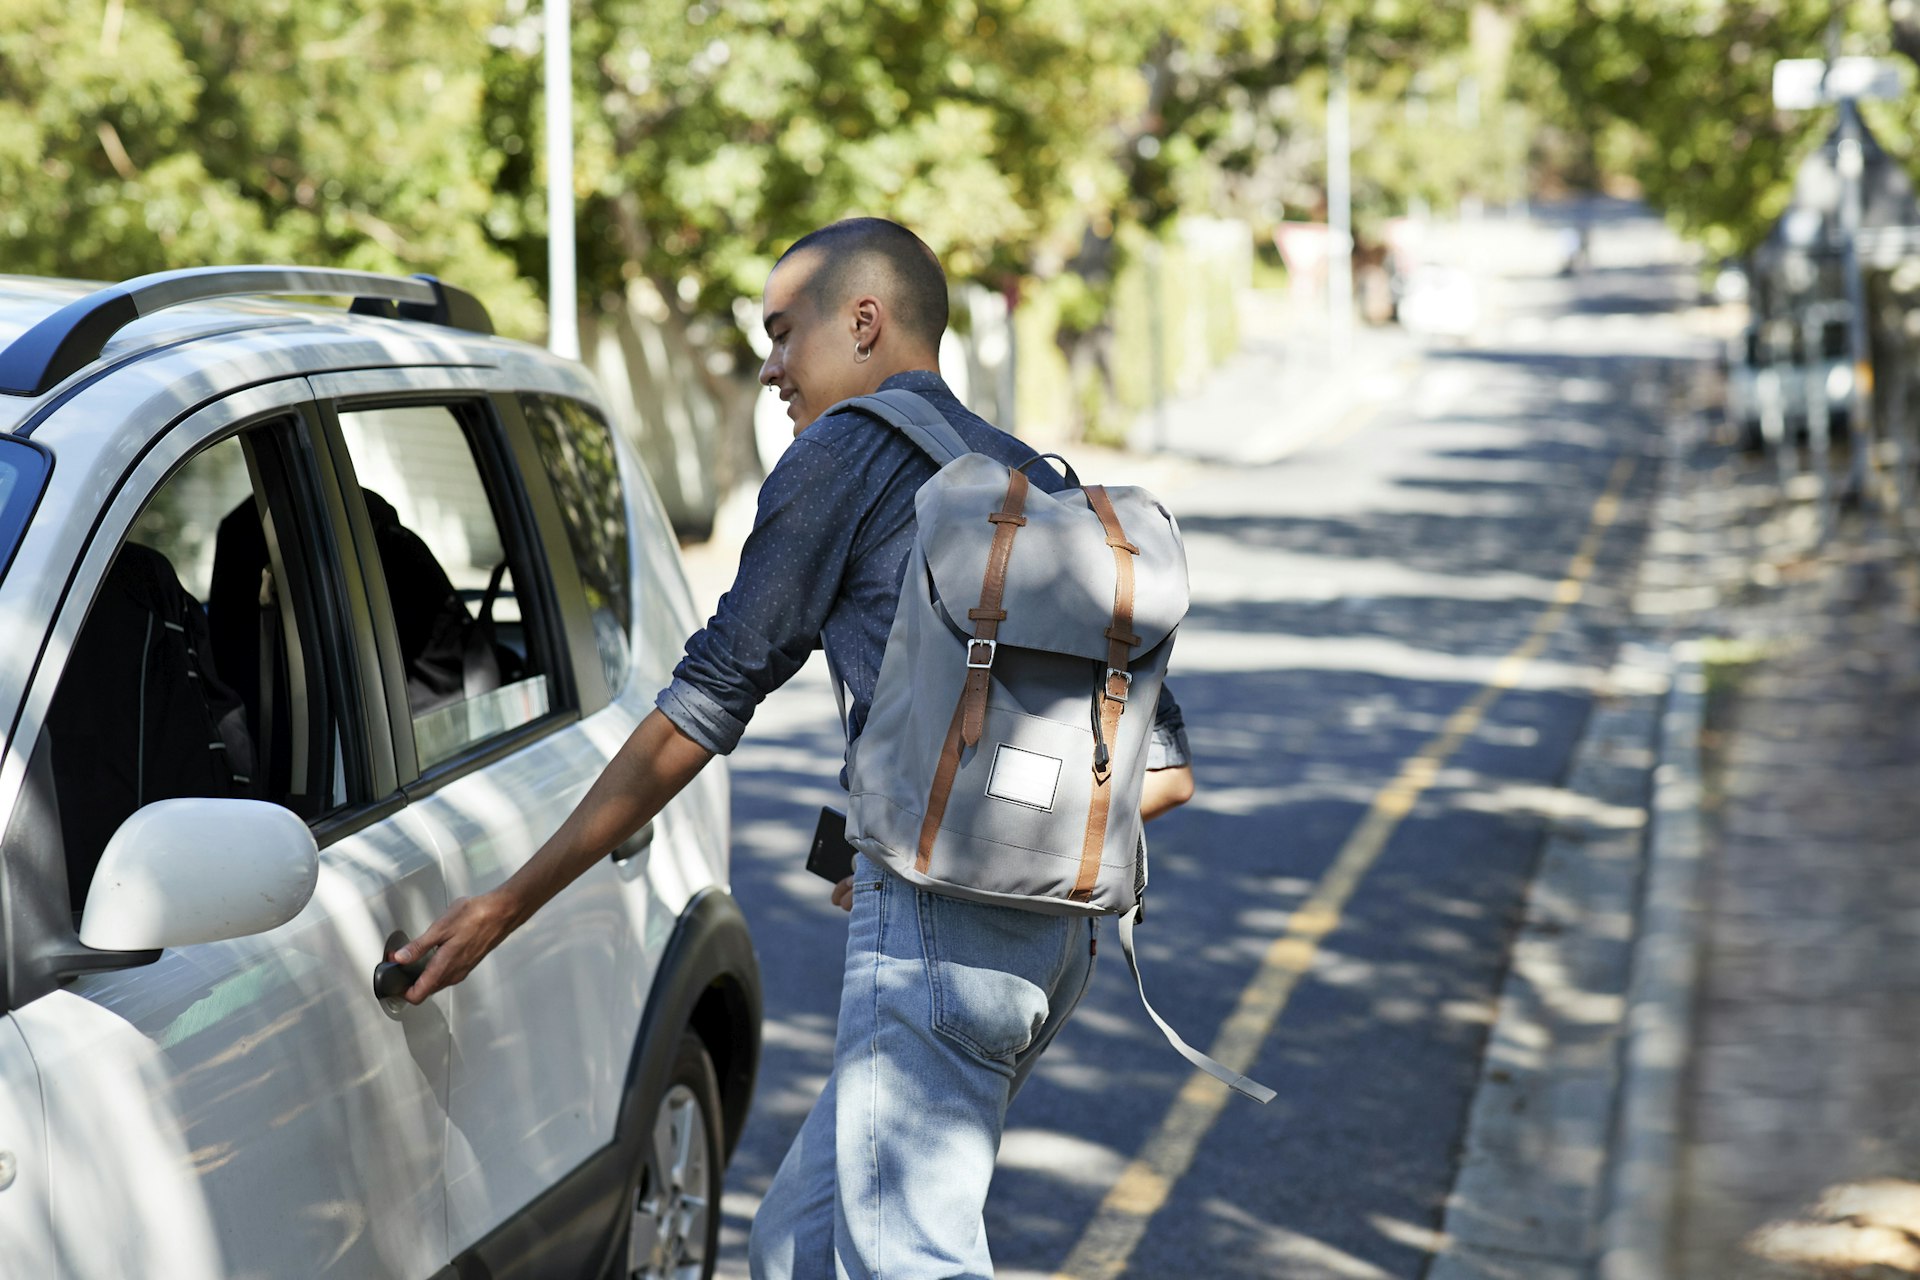 A guy wearing a backpack opening a car door in Cape Town, South Africa